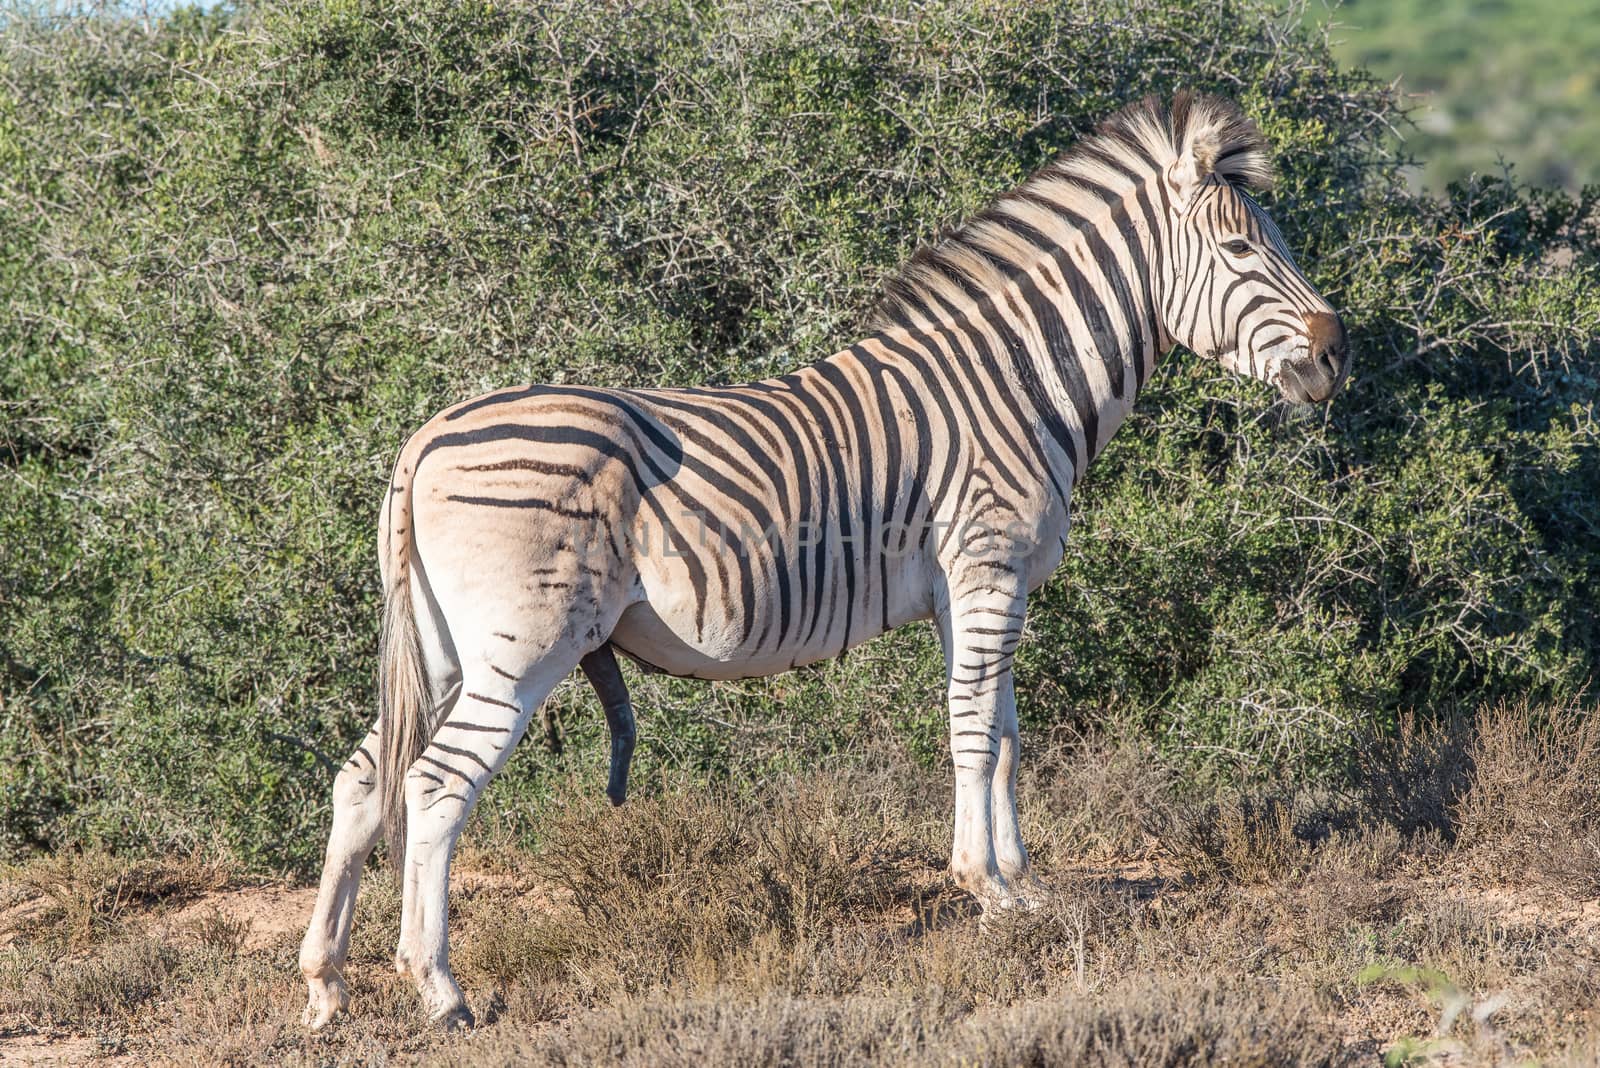 A Burchells zebra, Equus quagga burchellii, with genitals visible in the Addo Elephant National Park of South Africa